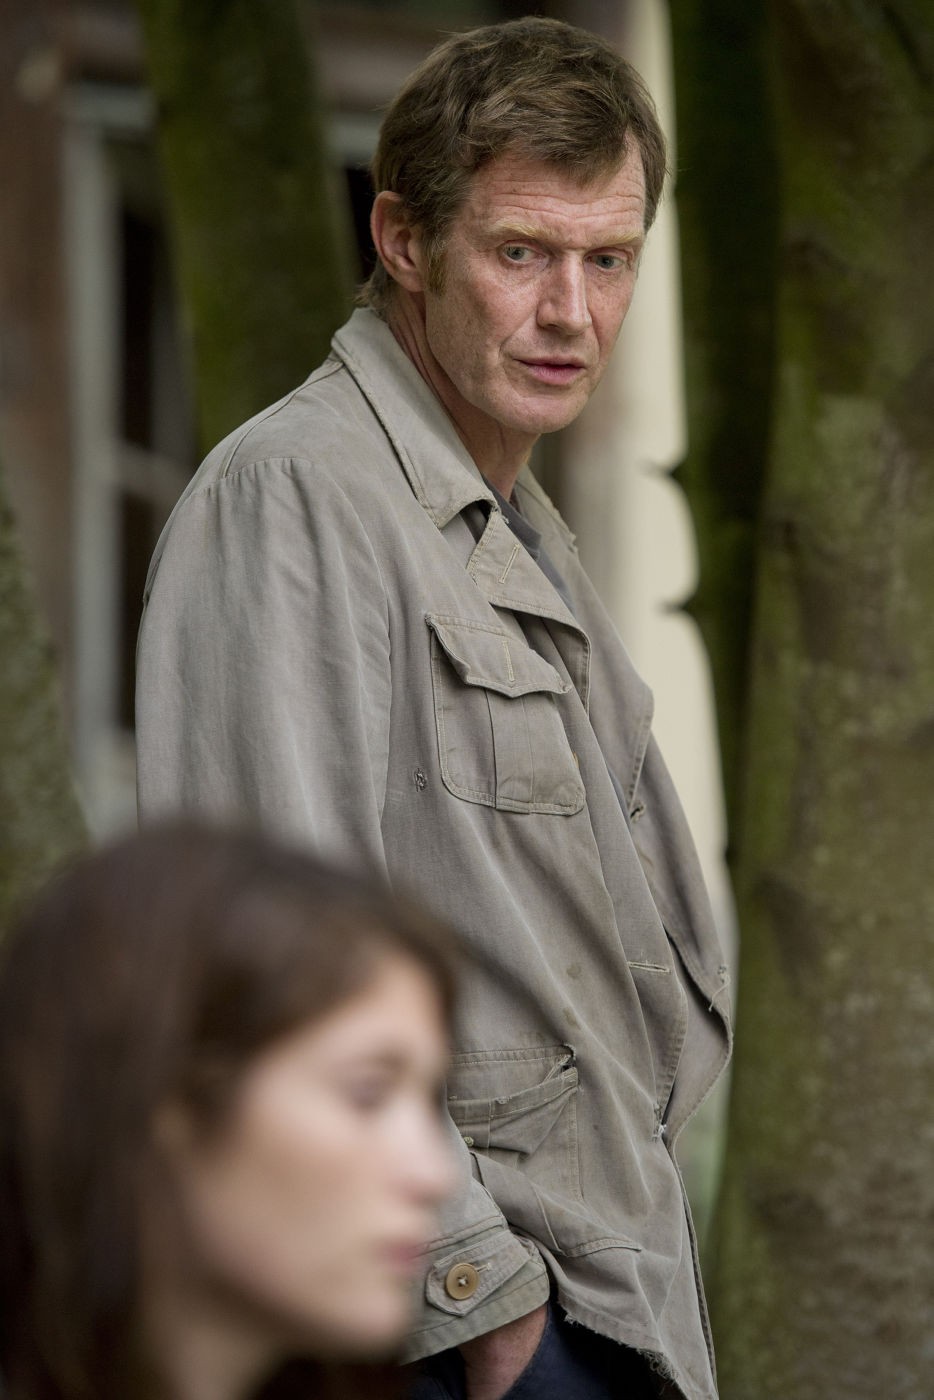 Jason Flemyng stars as Charlie in Music Box Films' Gemma Bovery (2015)